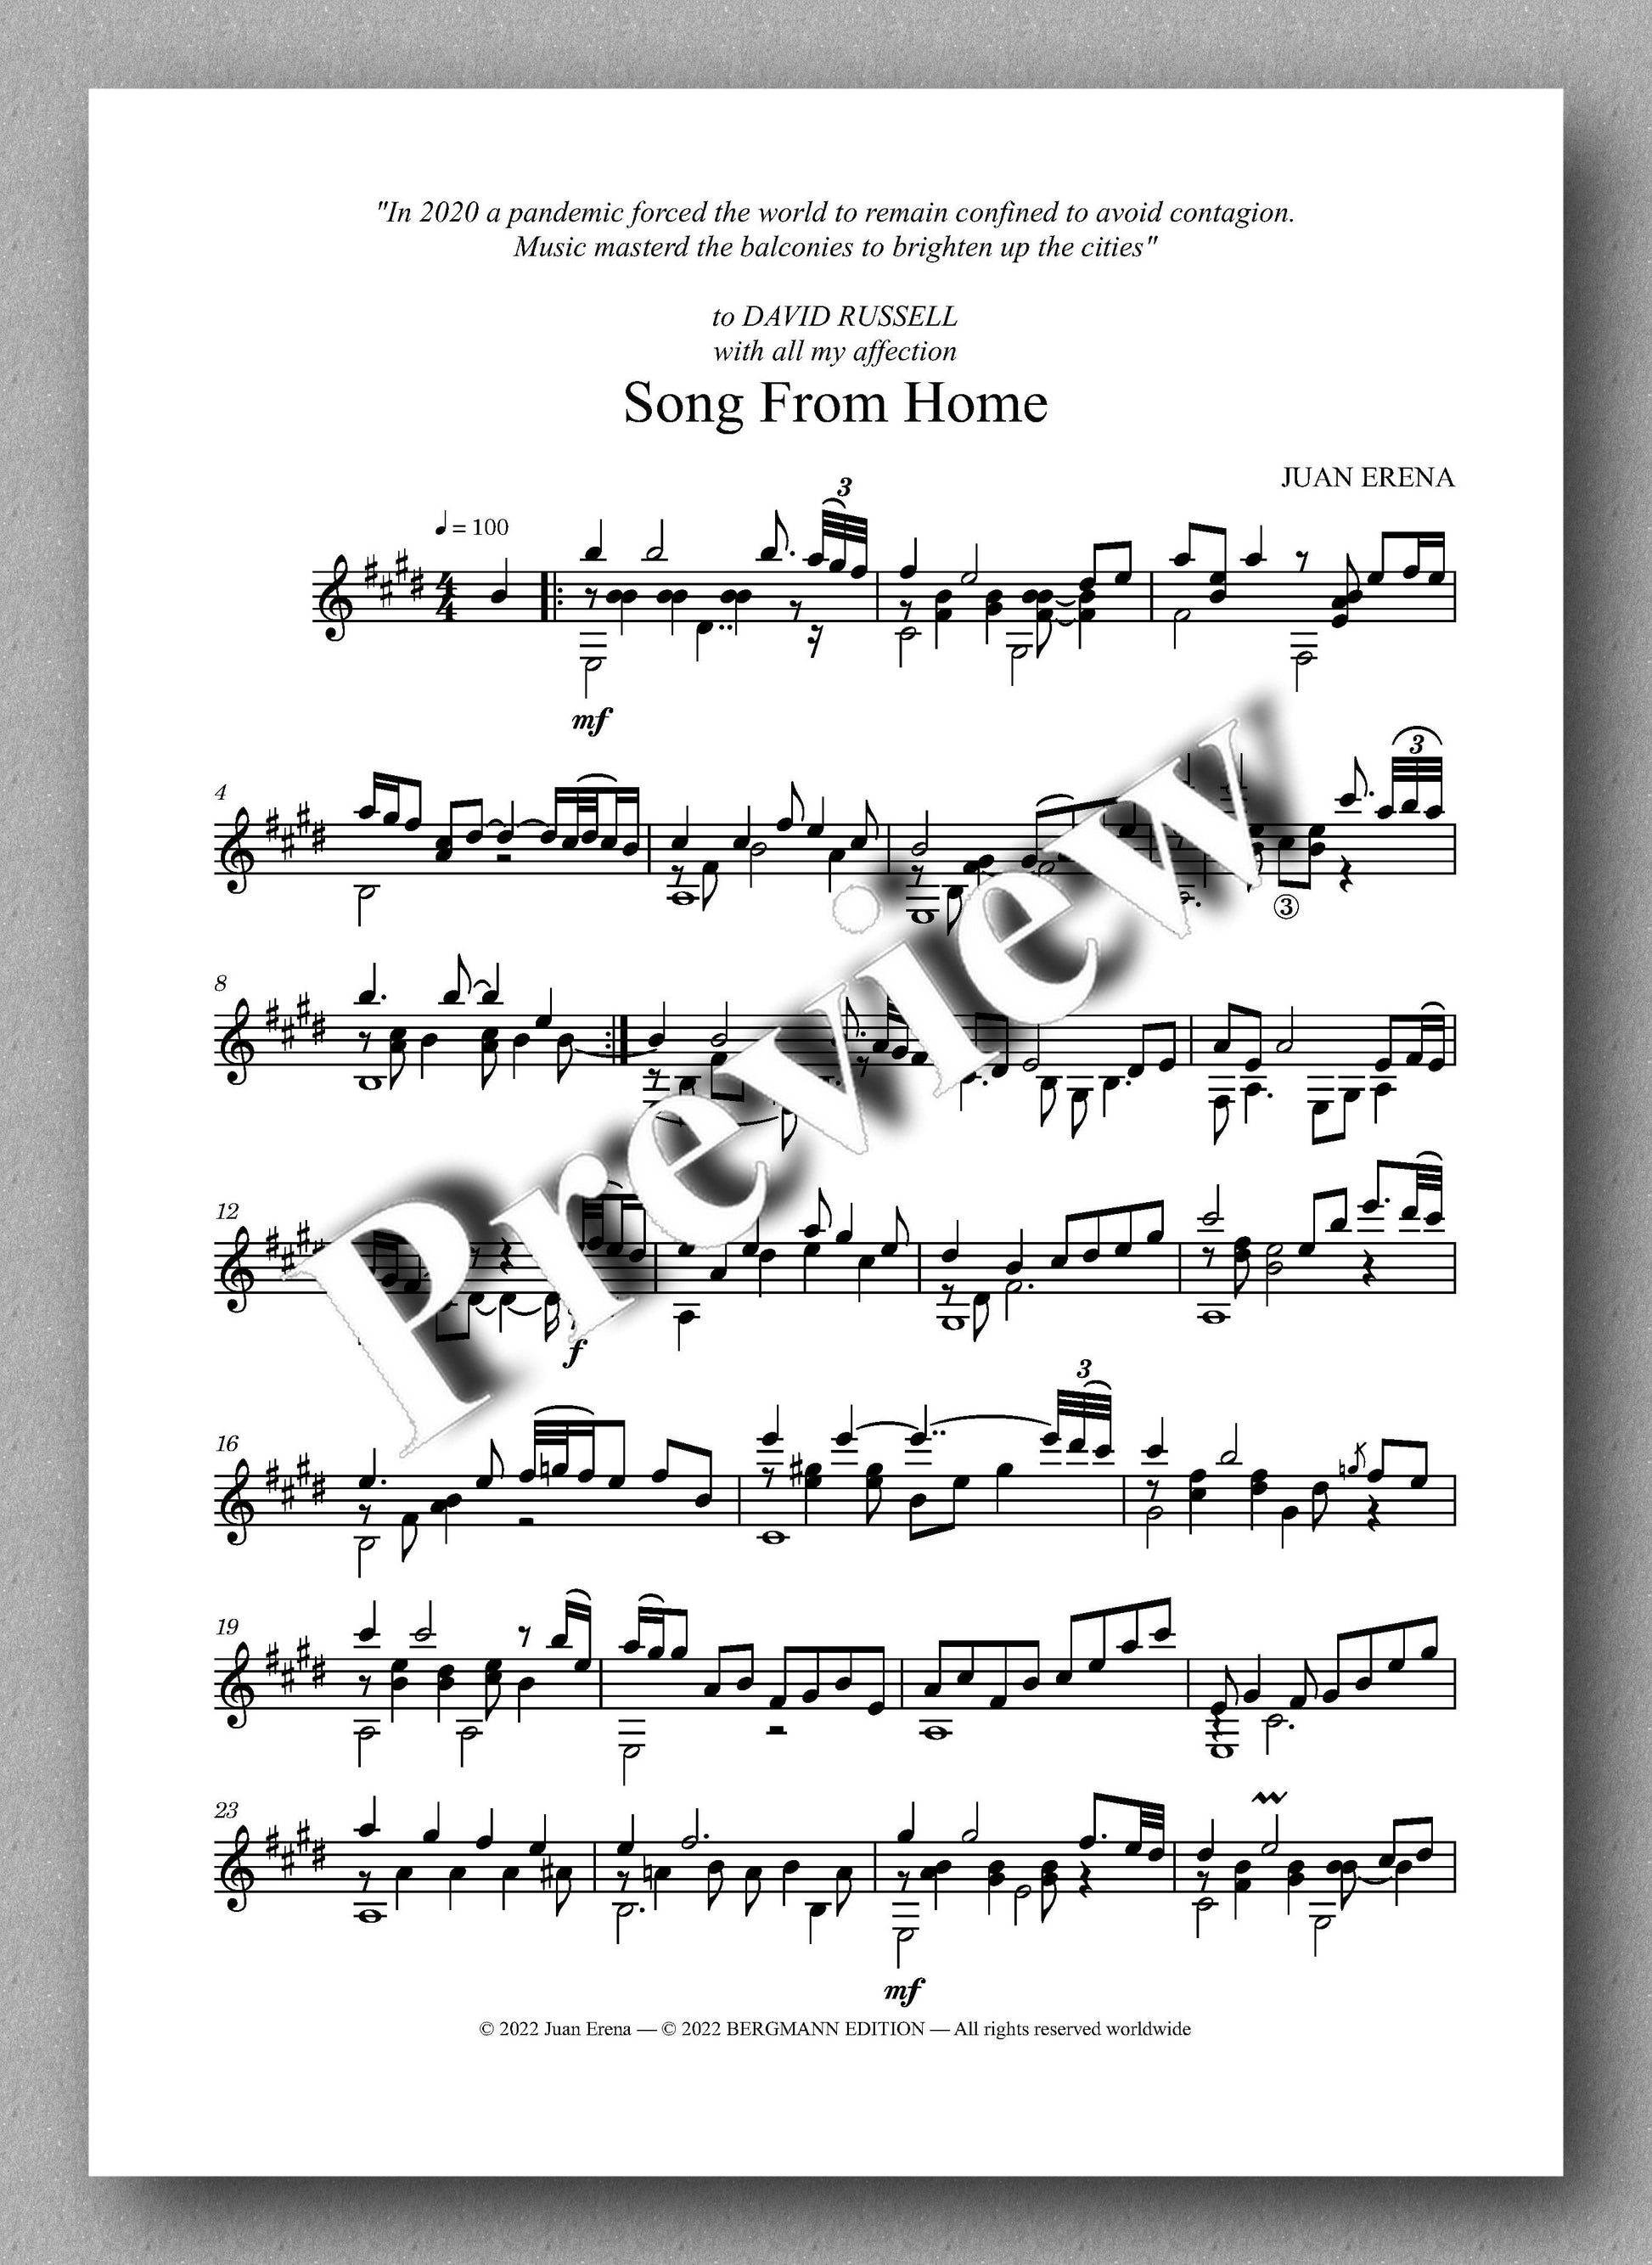 Juan Erena, Song From Home - preview of the music score